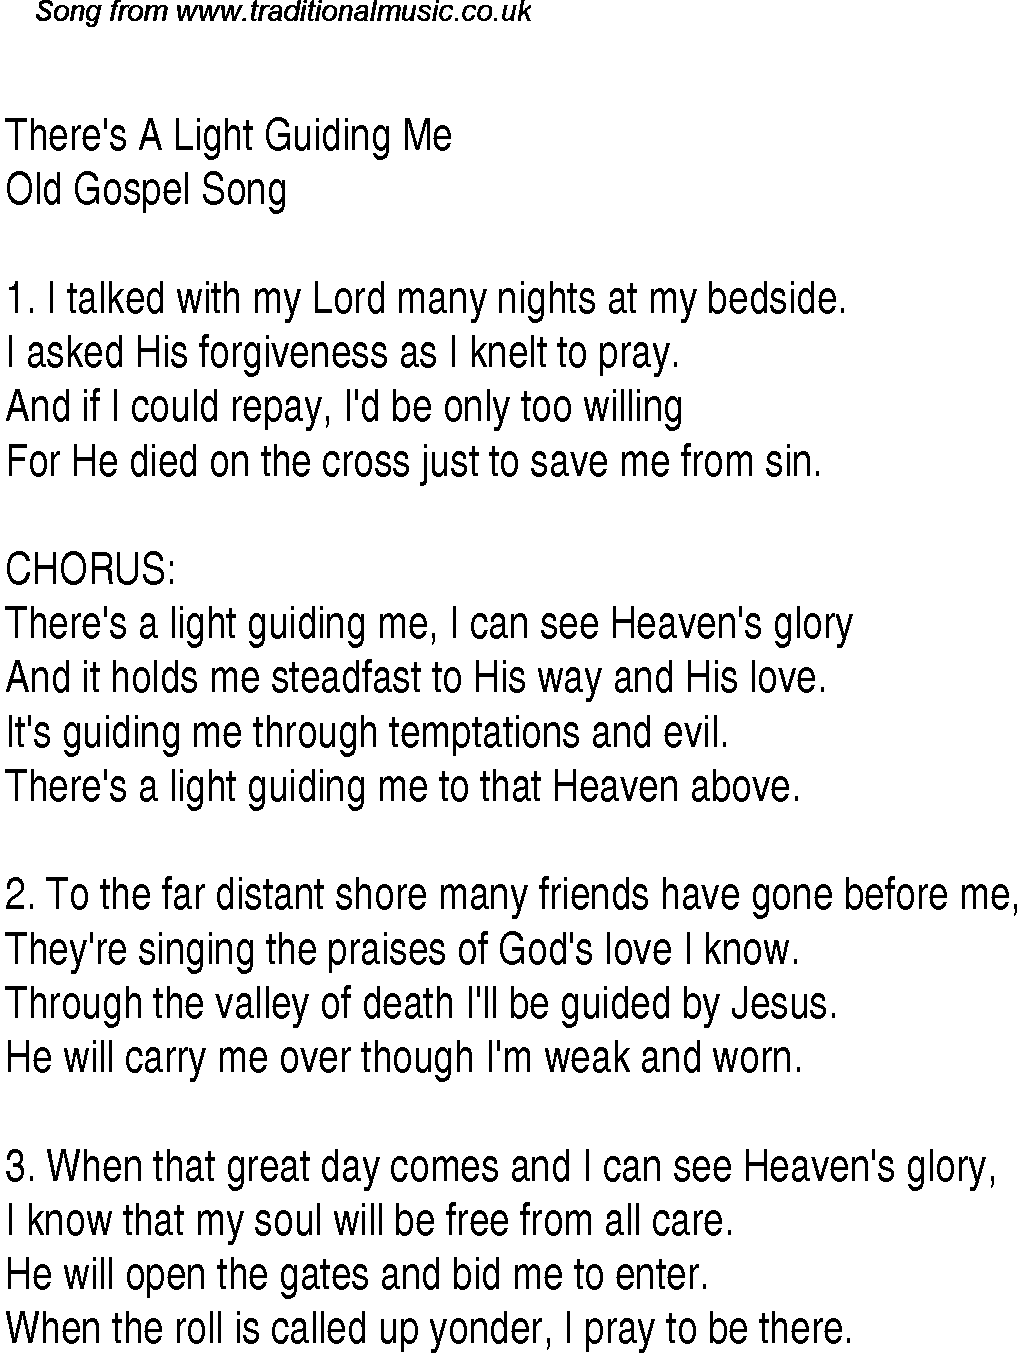 Gospel Song: there's-a-light-guiding-me, lyrics and chords.